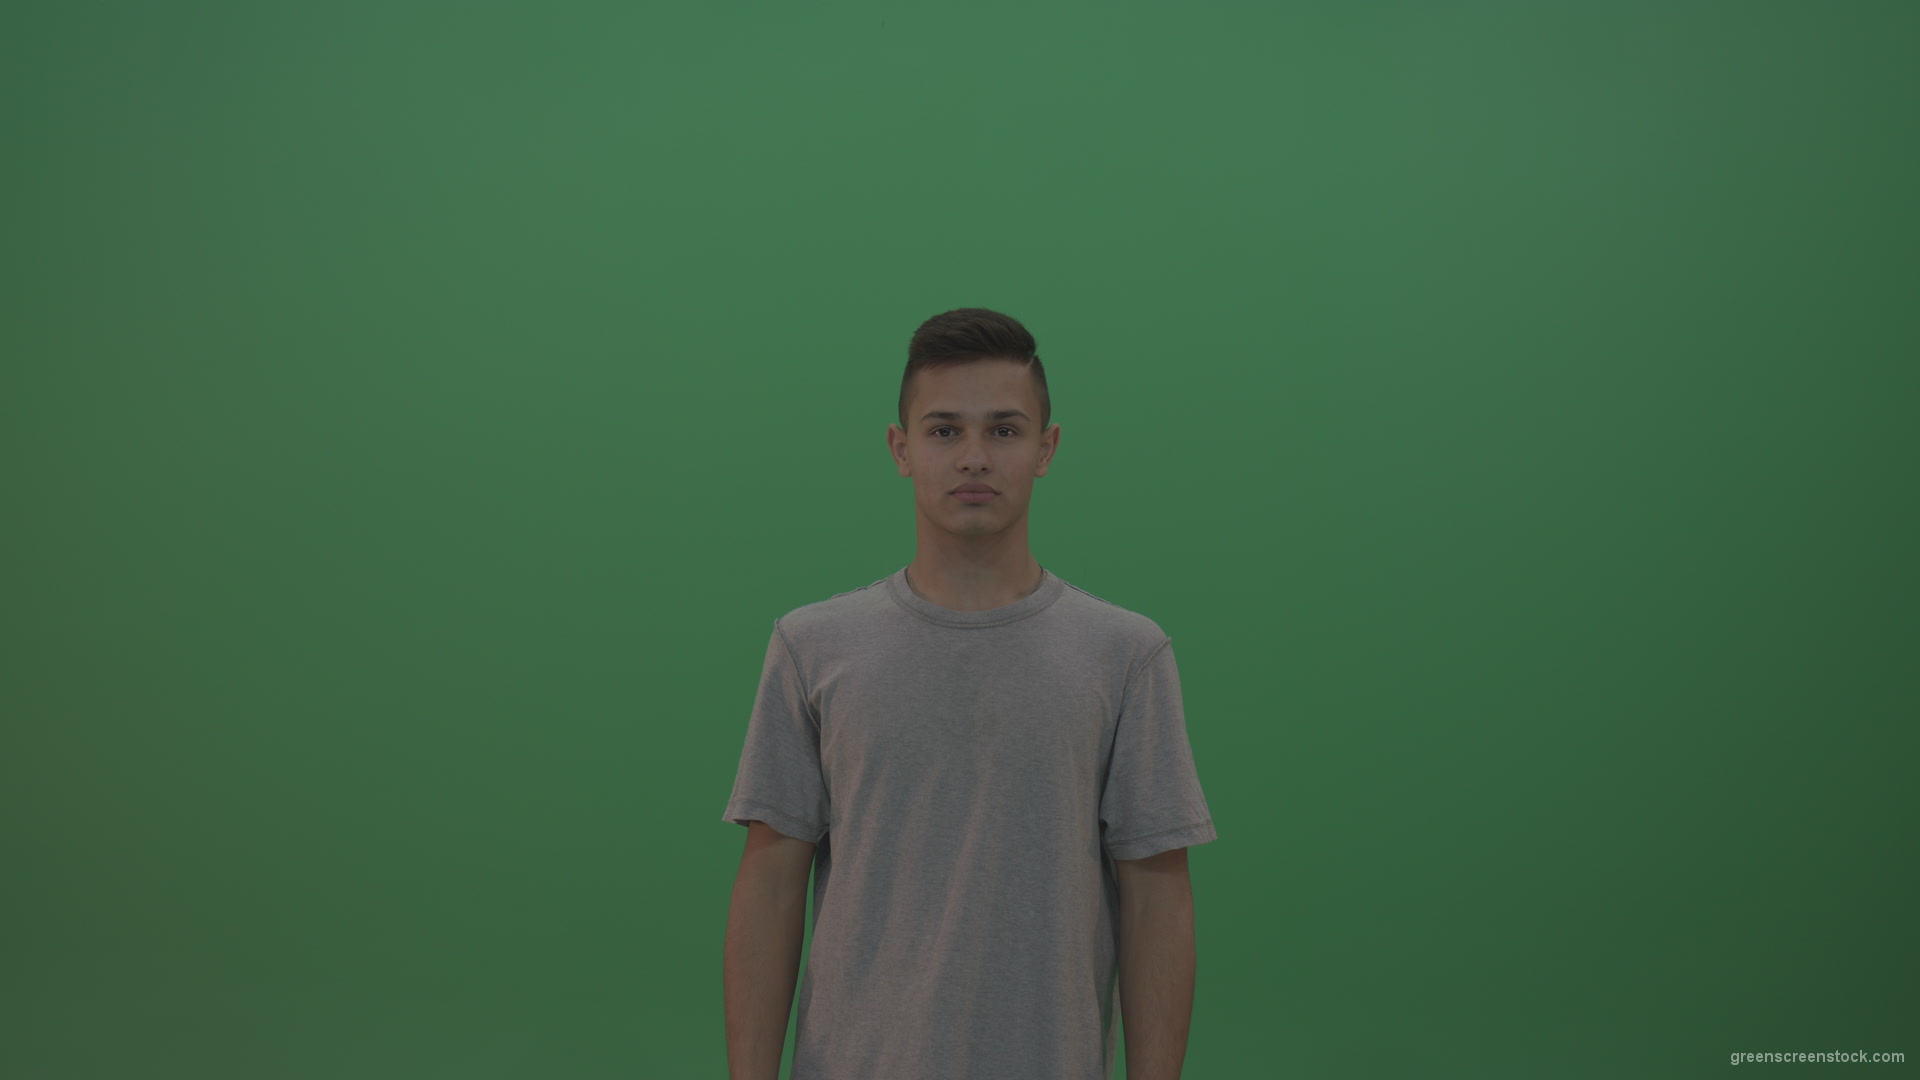 Boy-in-grey-wear-expresses-disappointment-over-green-screen-background_001 Green Screen Stock